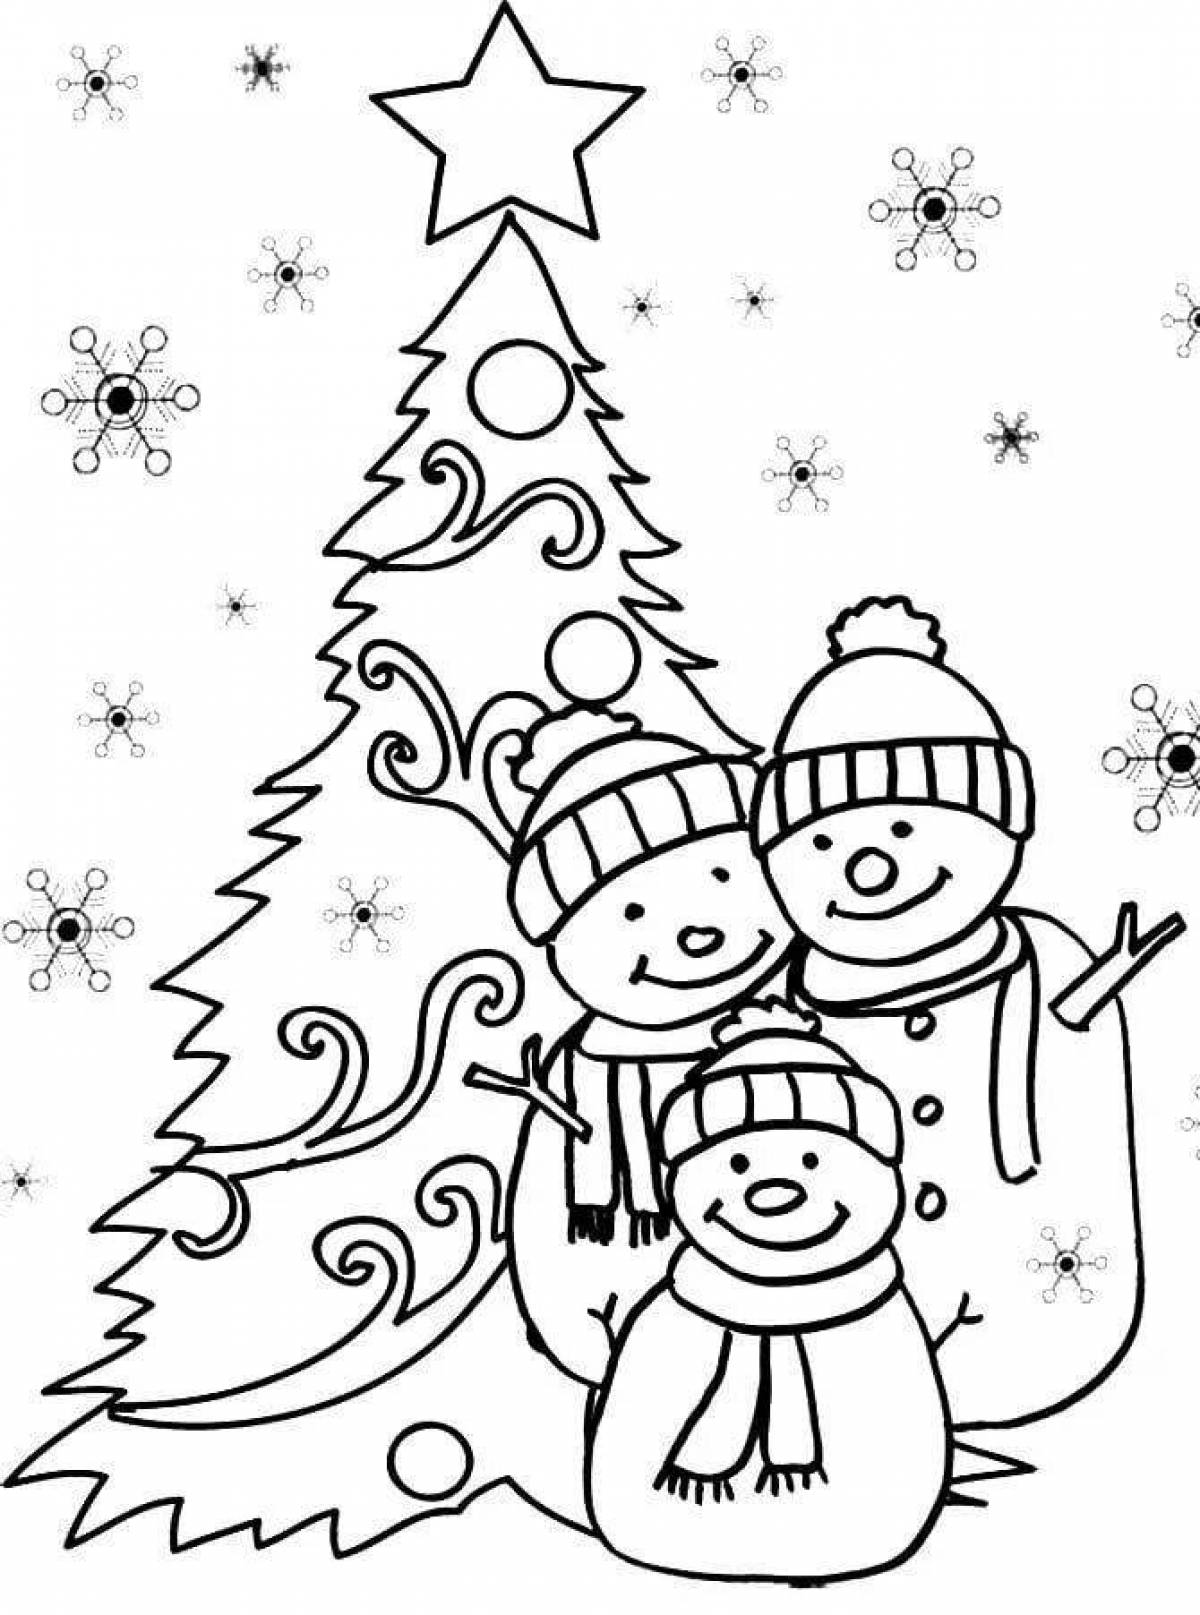 Playful tree and snowman coloring page